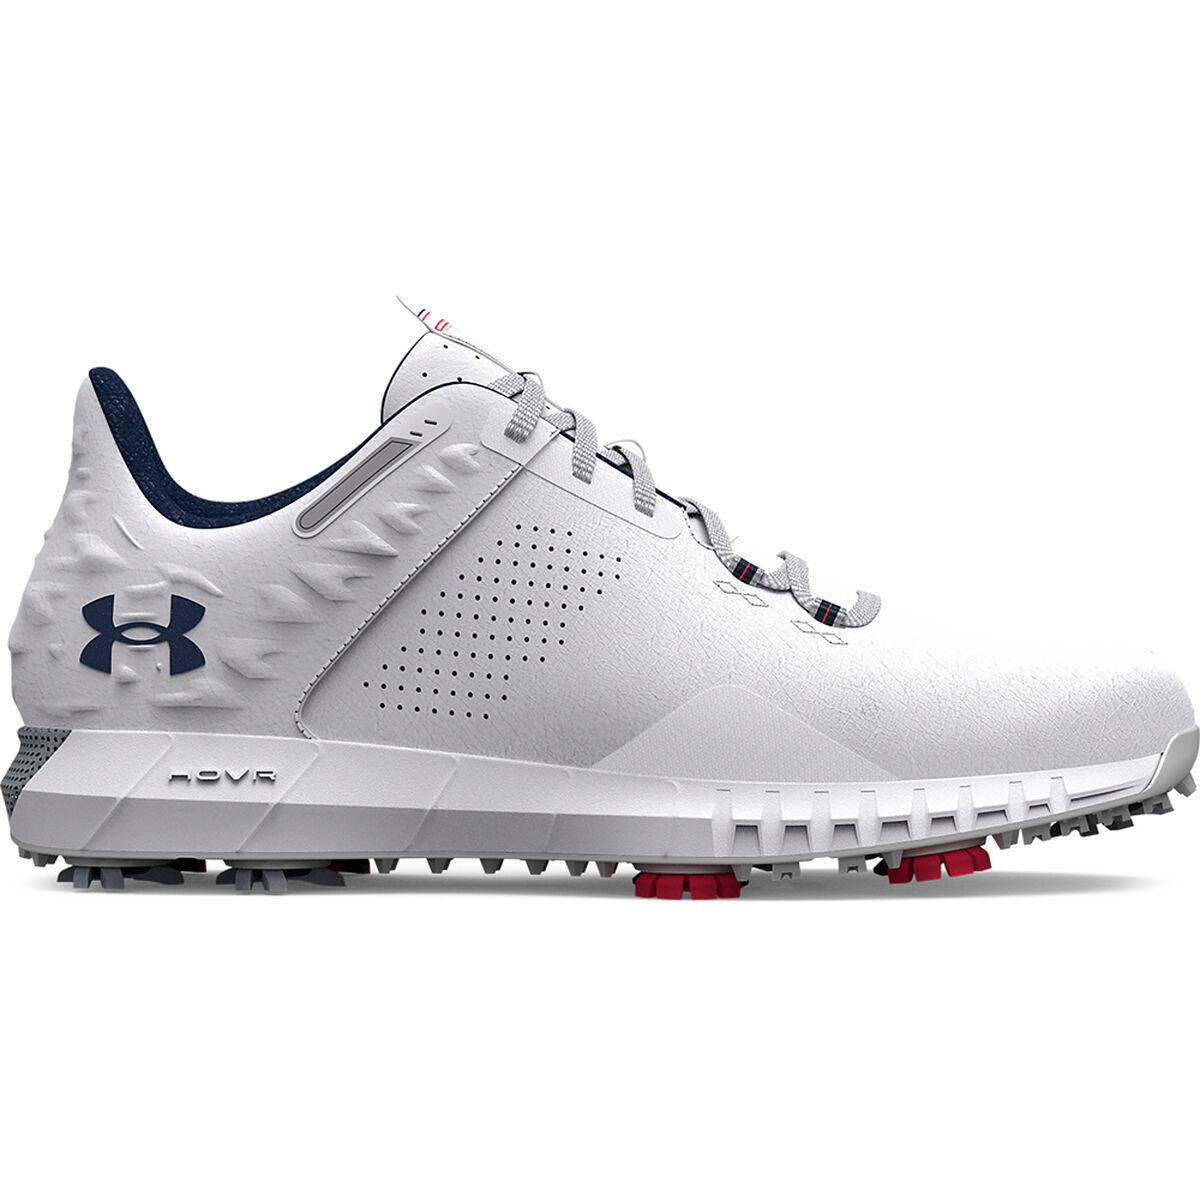 Under Armour HOVR drive 2 golf shoes